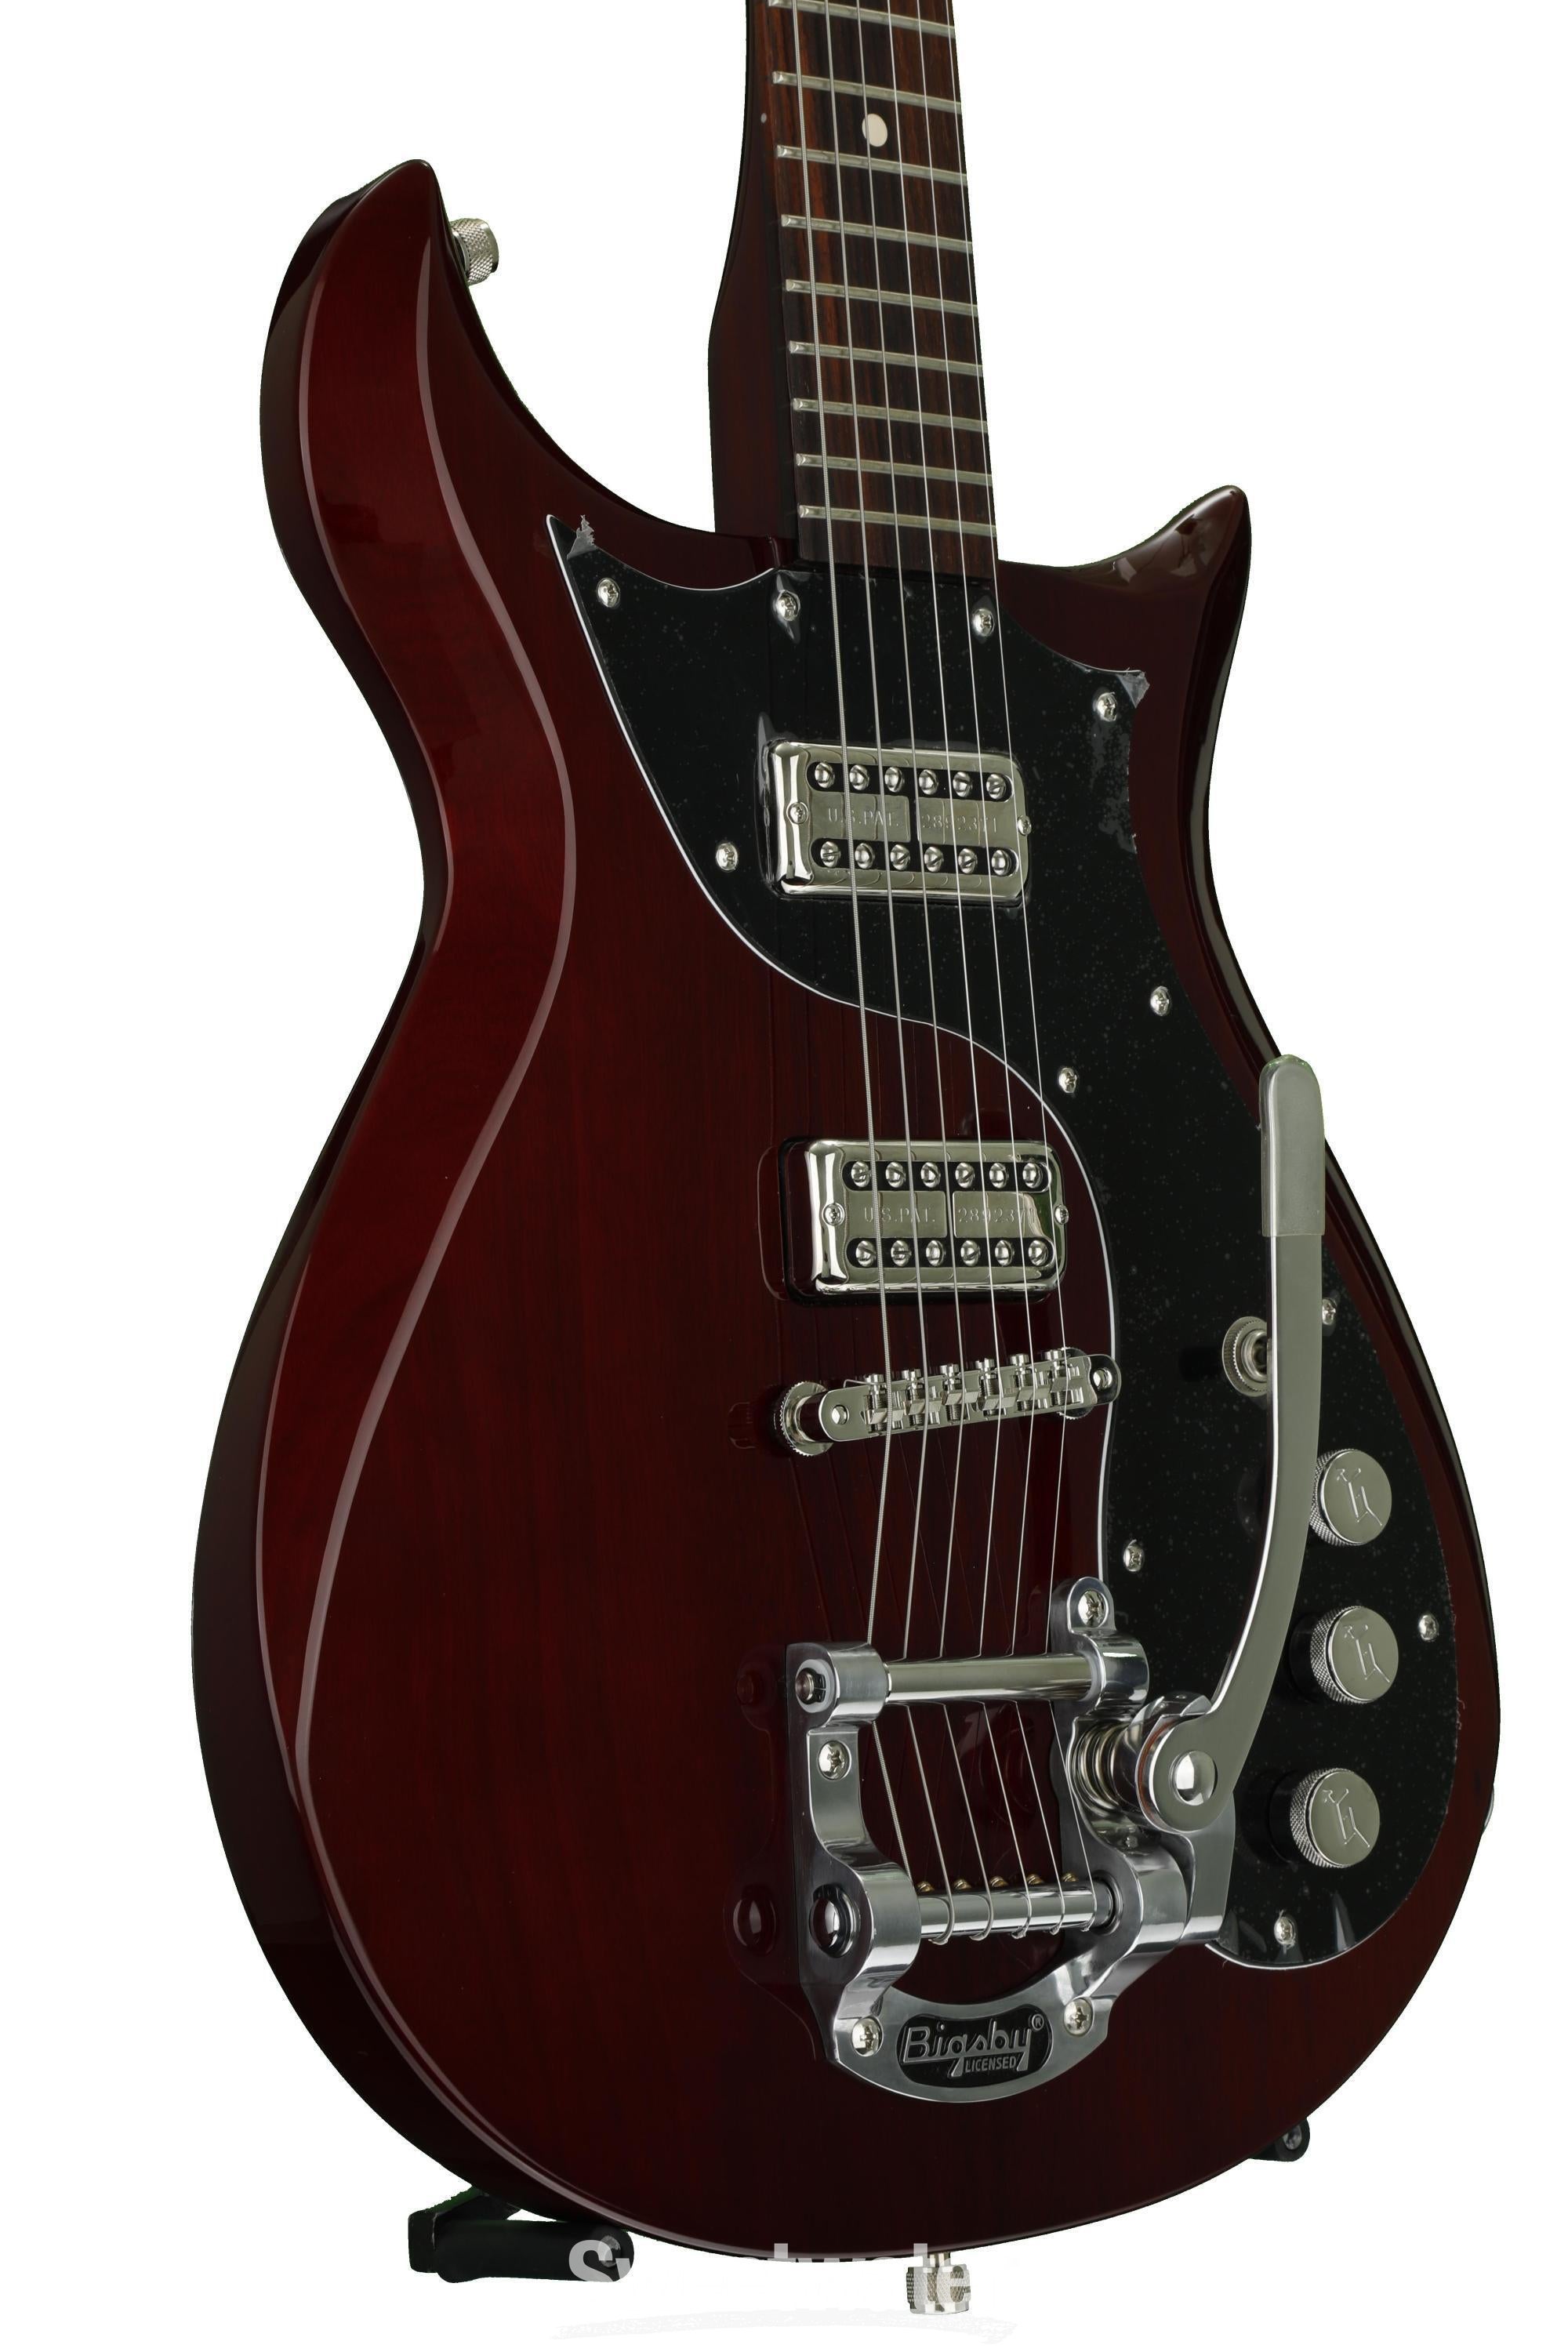 Gretsch G5135 Electromatic Corvette - Cherry Stain | Sweetwater